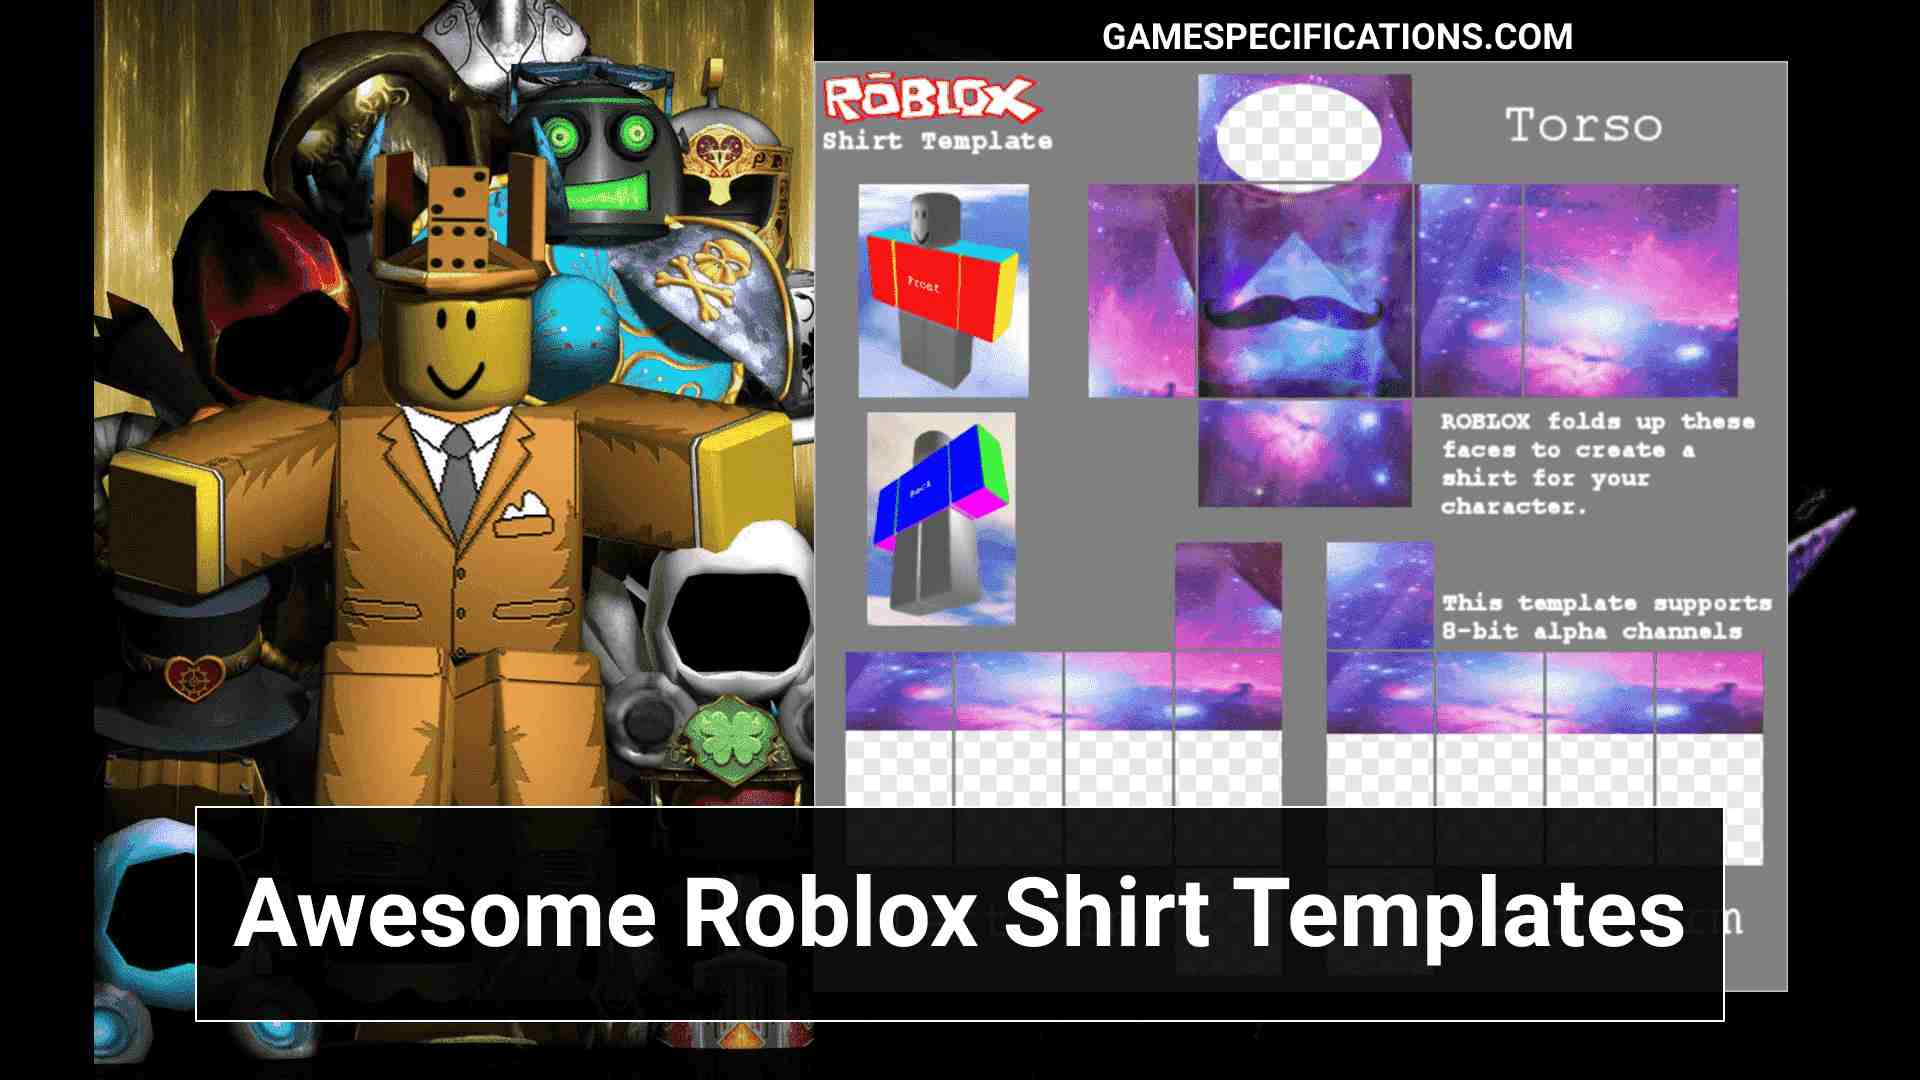 25 Coolest Roblox Shirt Templates Proved To Be The Best Game Specifications - roblox how to create t shirt